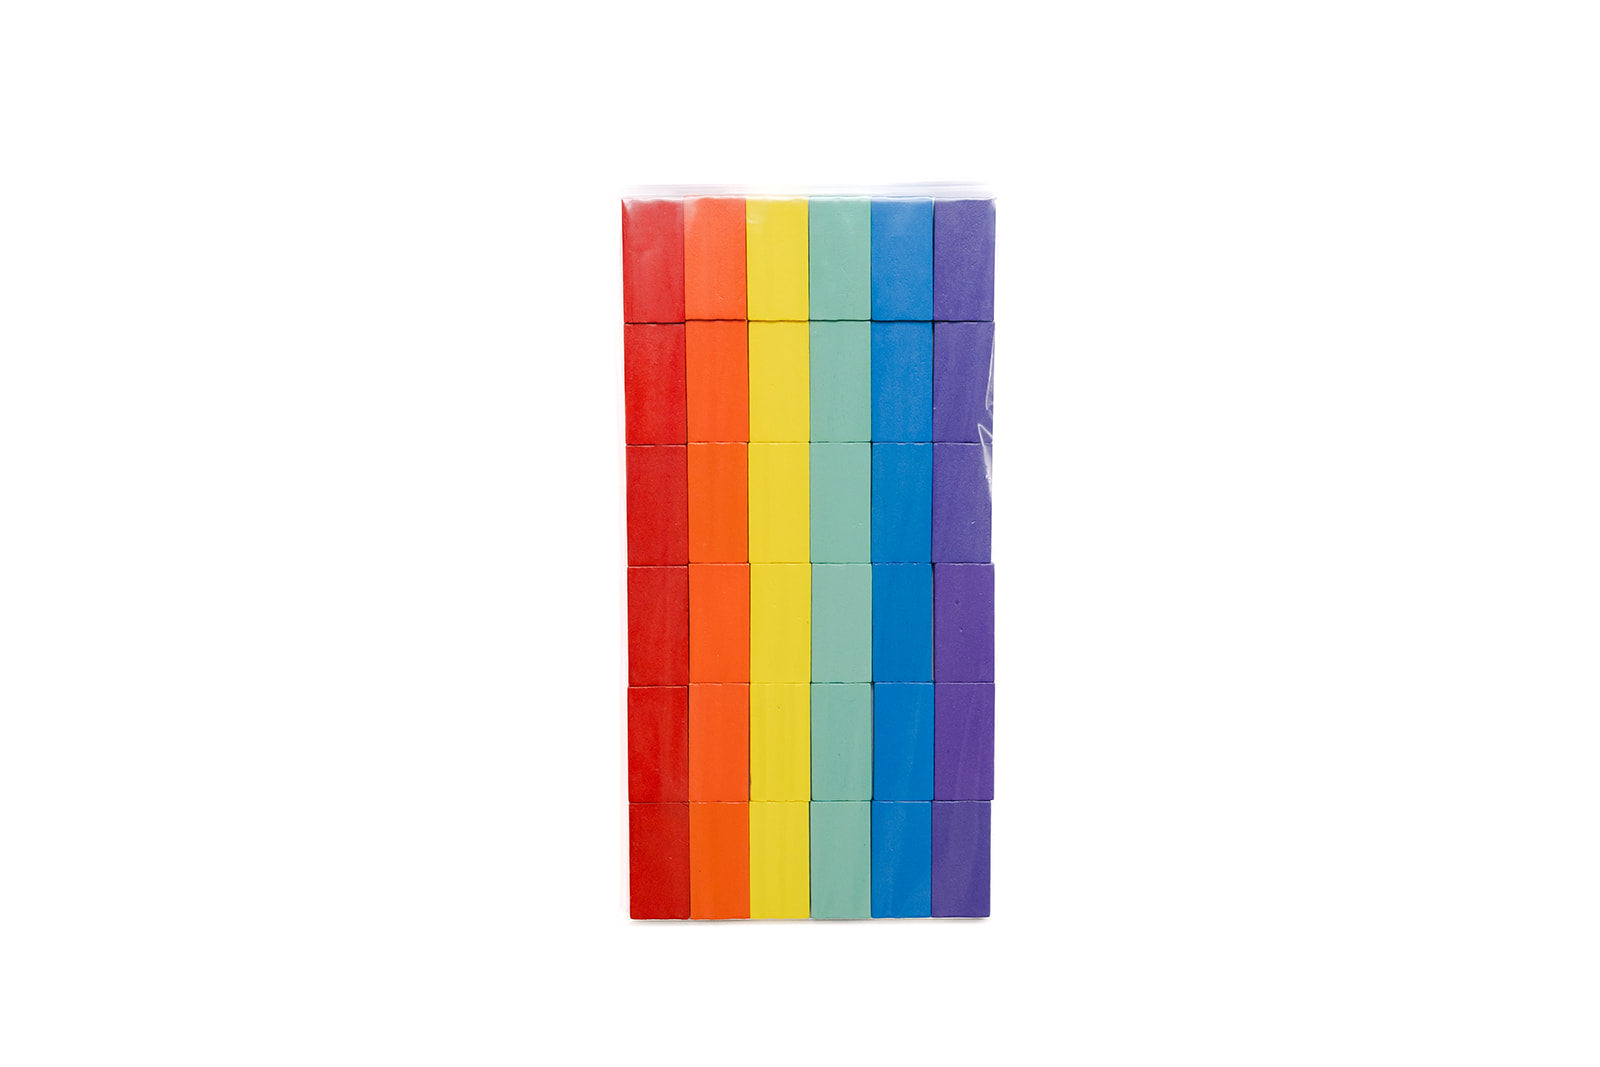 Sleeve of 36 colorful wooden dominoes.